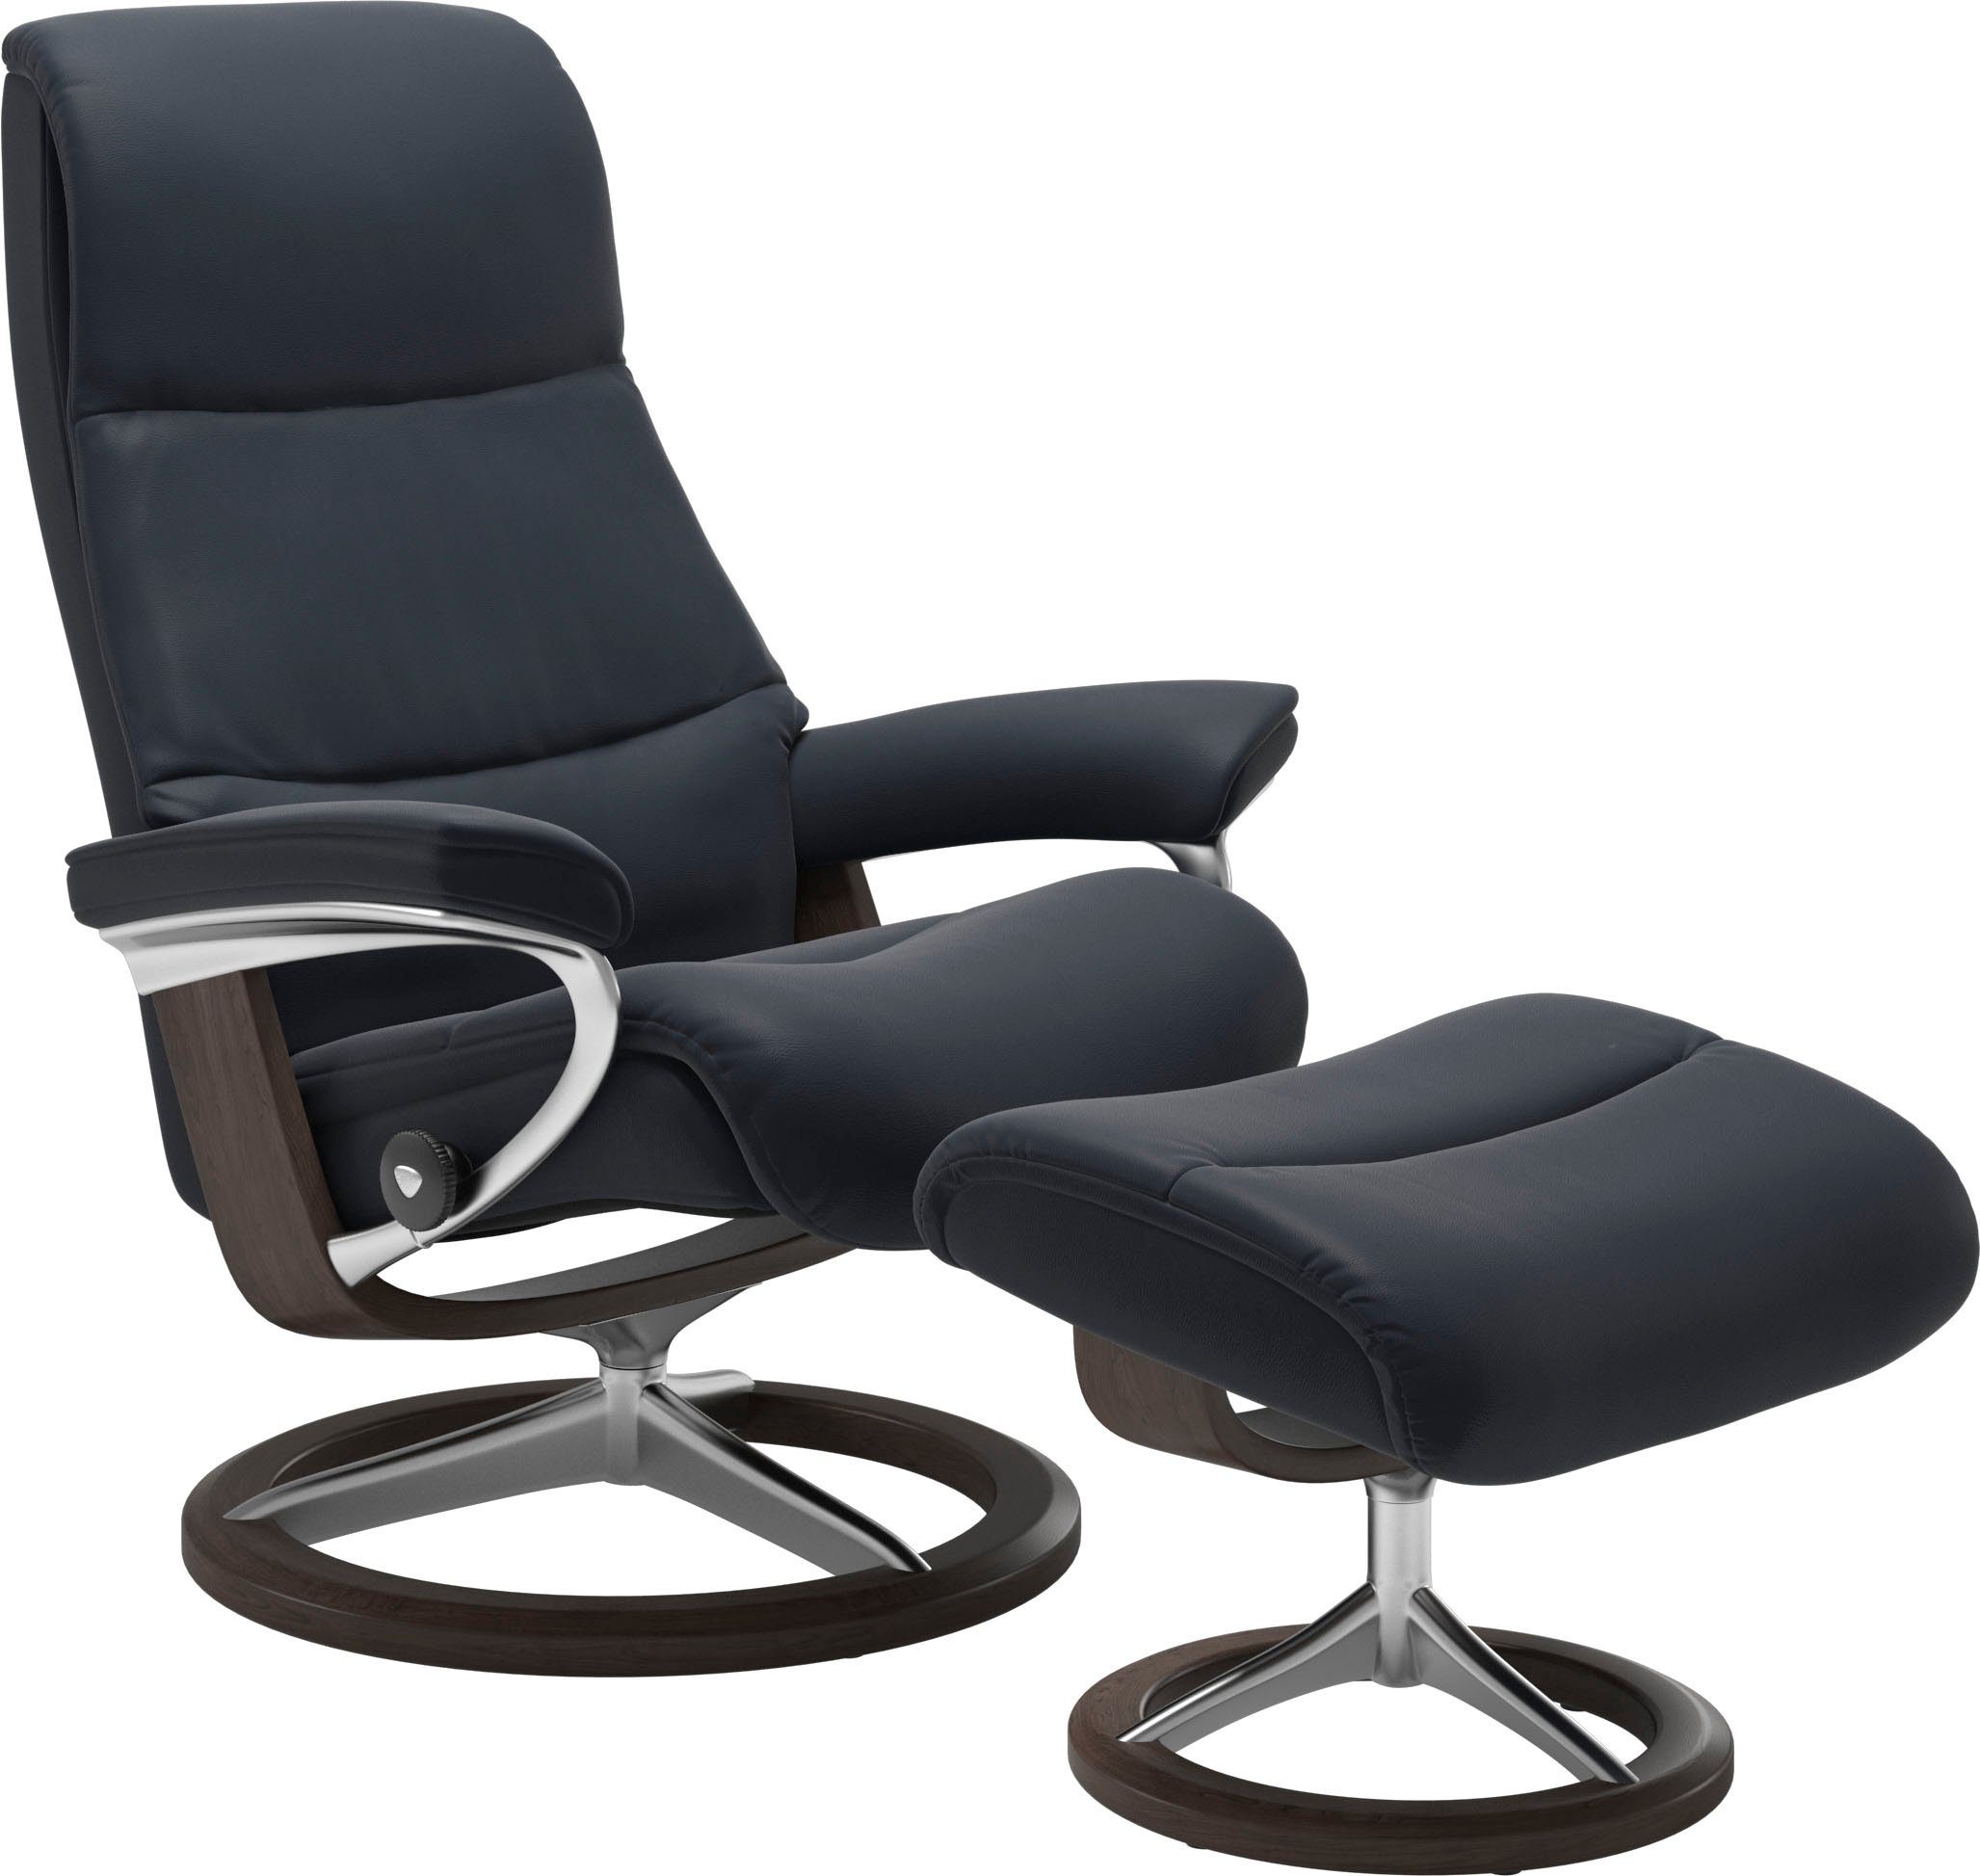 Base, Wenge Relaxsessel Größe View, Signature Stressless® S,Gestell mit